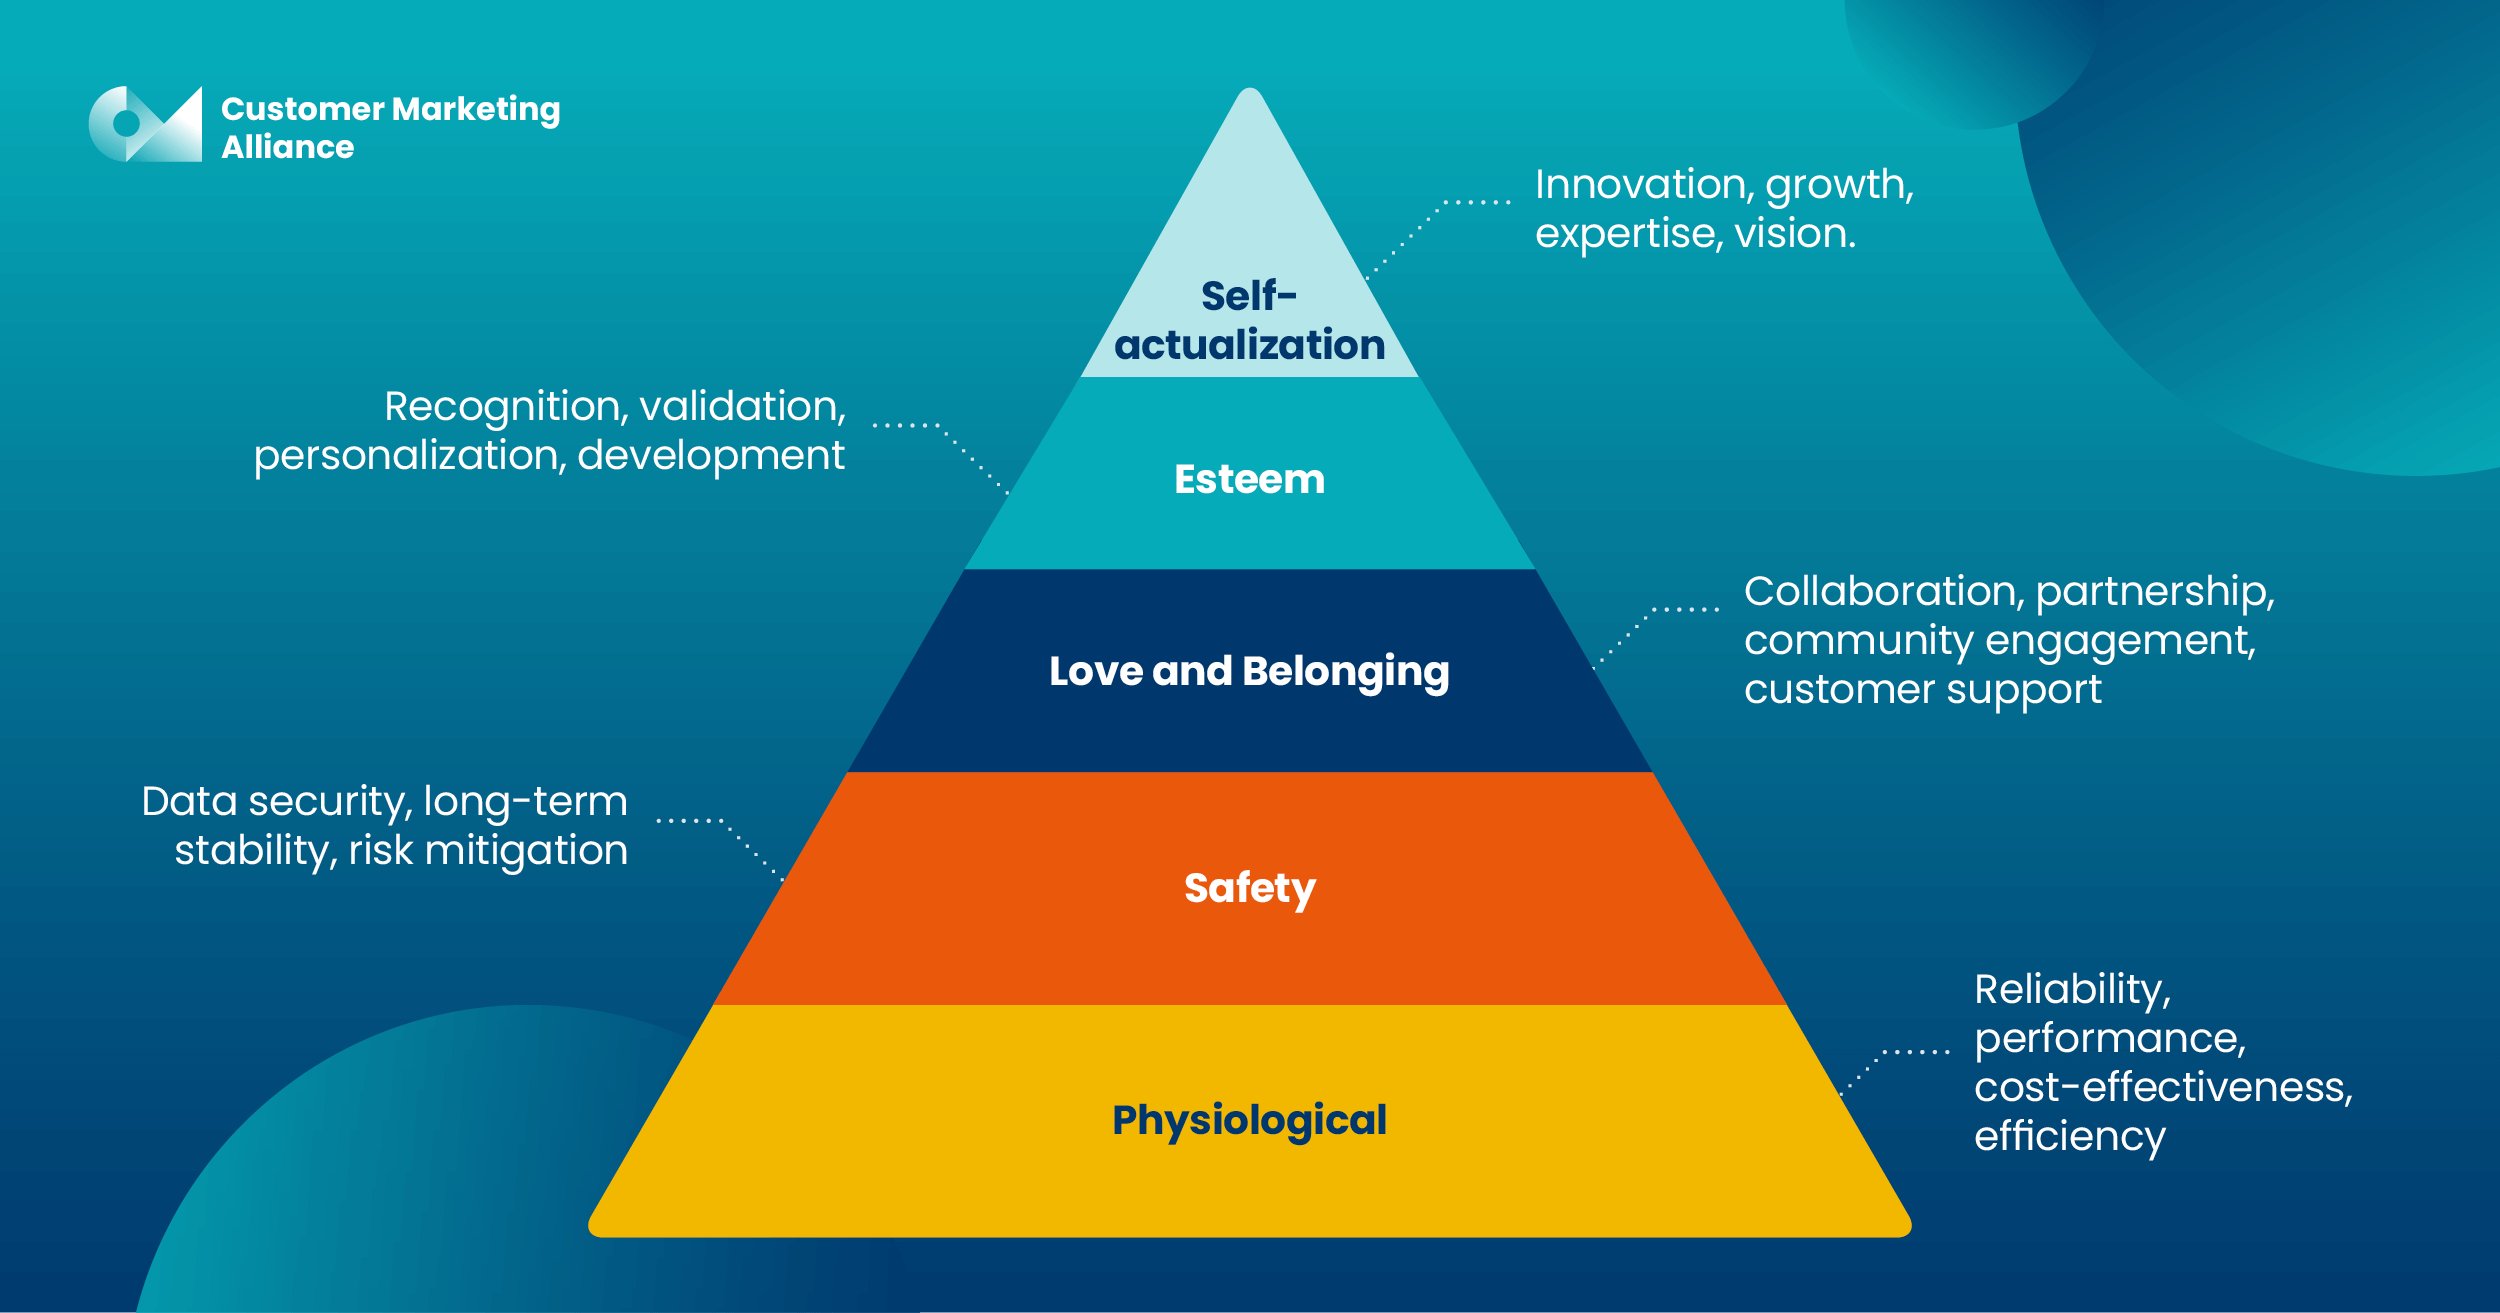 Maslow's Hierarchy of Needs for customers